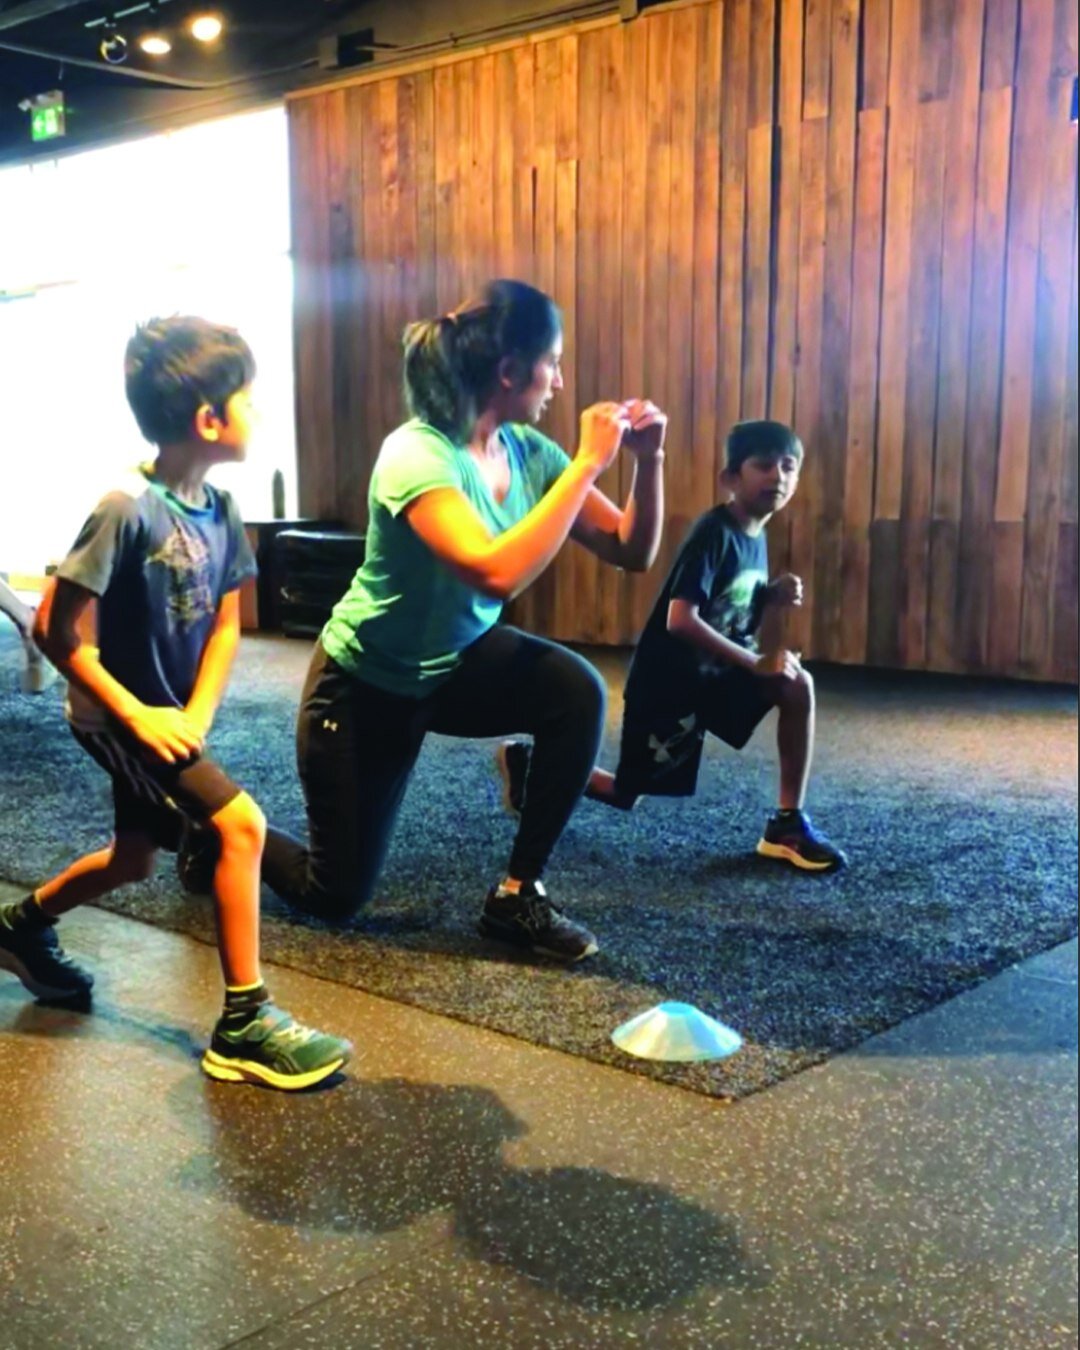 Exercise is important for EVERYONE! We love to see both mom and kids making their health a priority 👩&zwj;👦&zwj;👦

Exercise has so many benefits for children &ndash; improves their coordination, balance, posture and flexibility, while also strengt